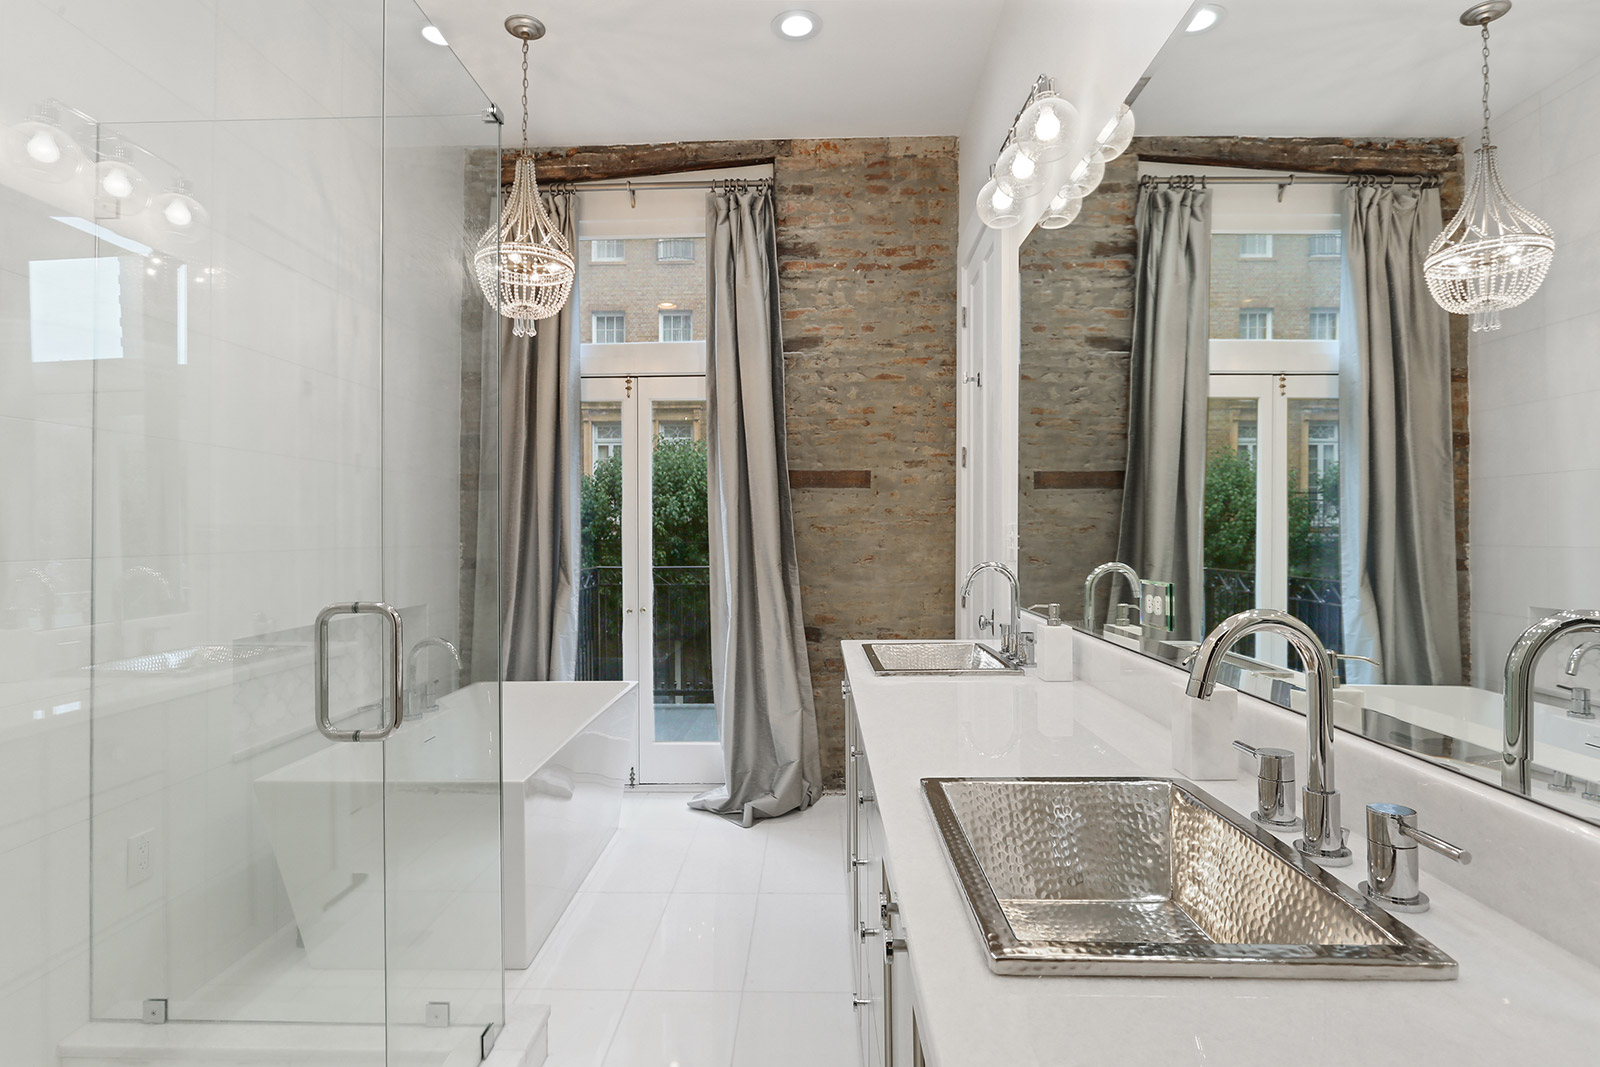 Charles House Luxury Bathroom Renovation designed and built by DMG Design+Build